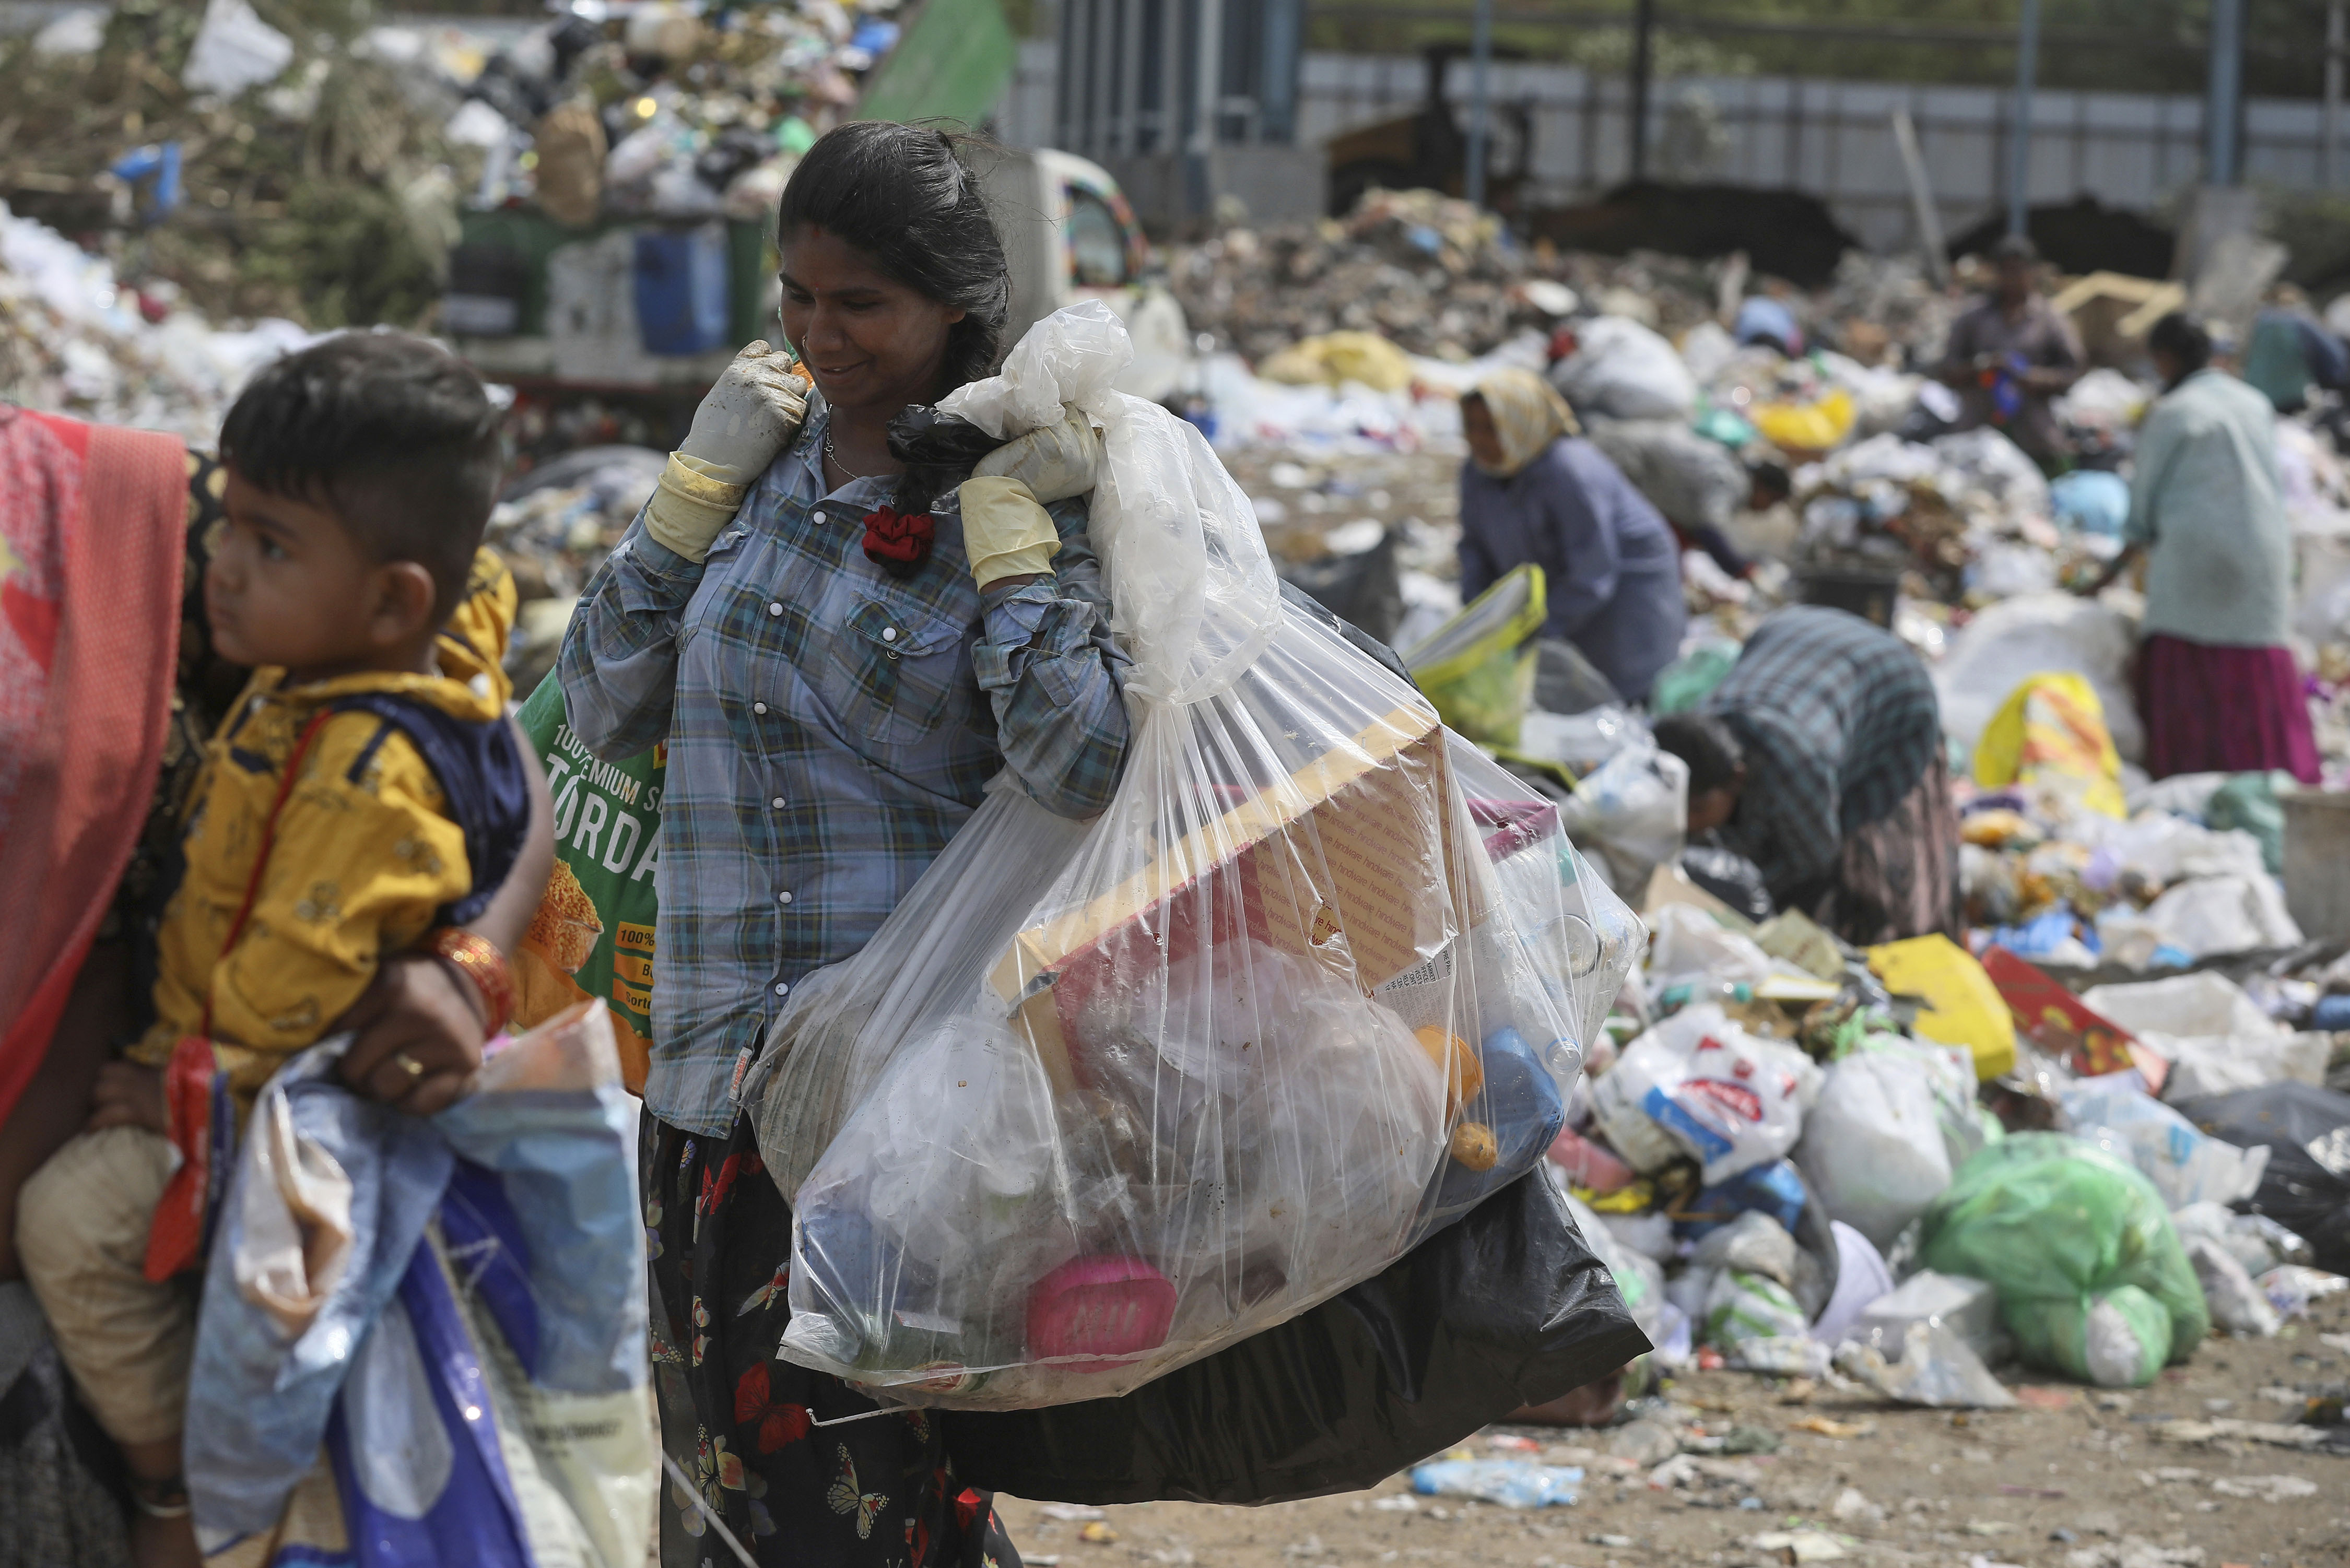 Ragpickers collect reusable material at a garbage dump in Hyderabad, India, on June 4, 2022. (Mahesh Kumar—AP)